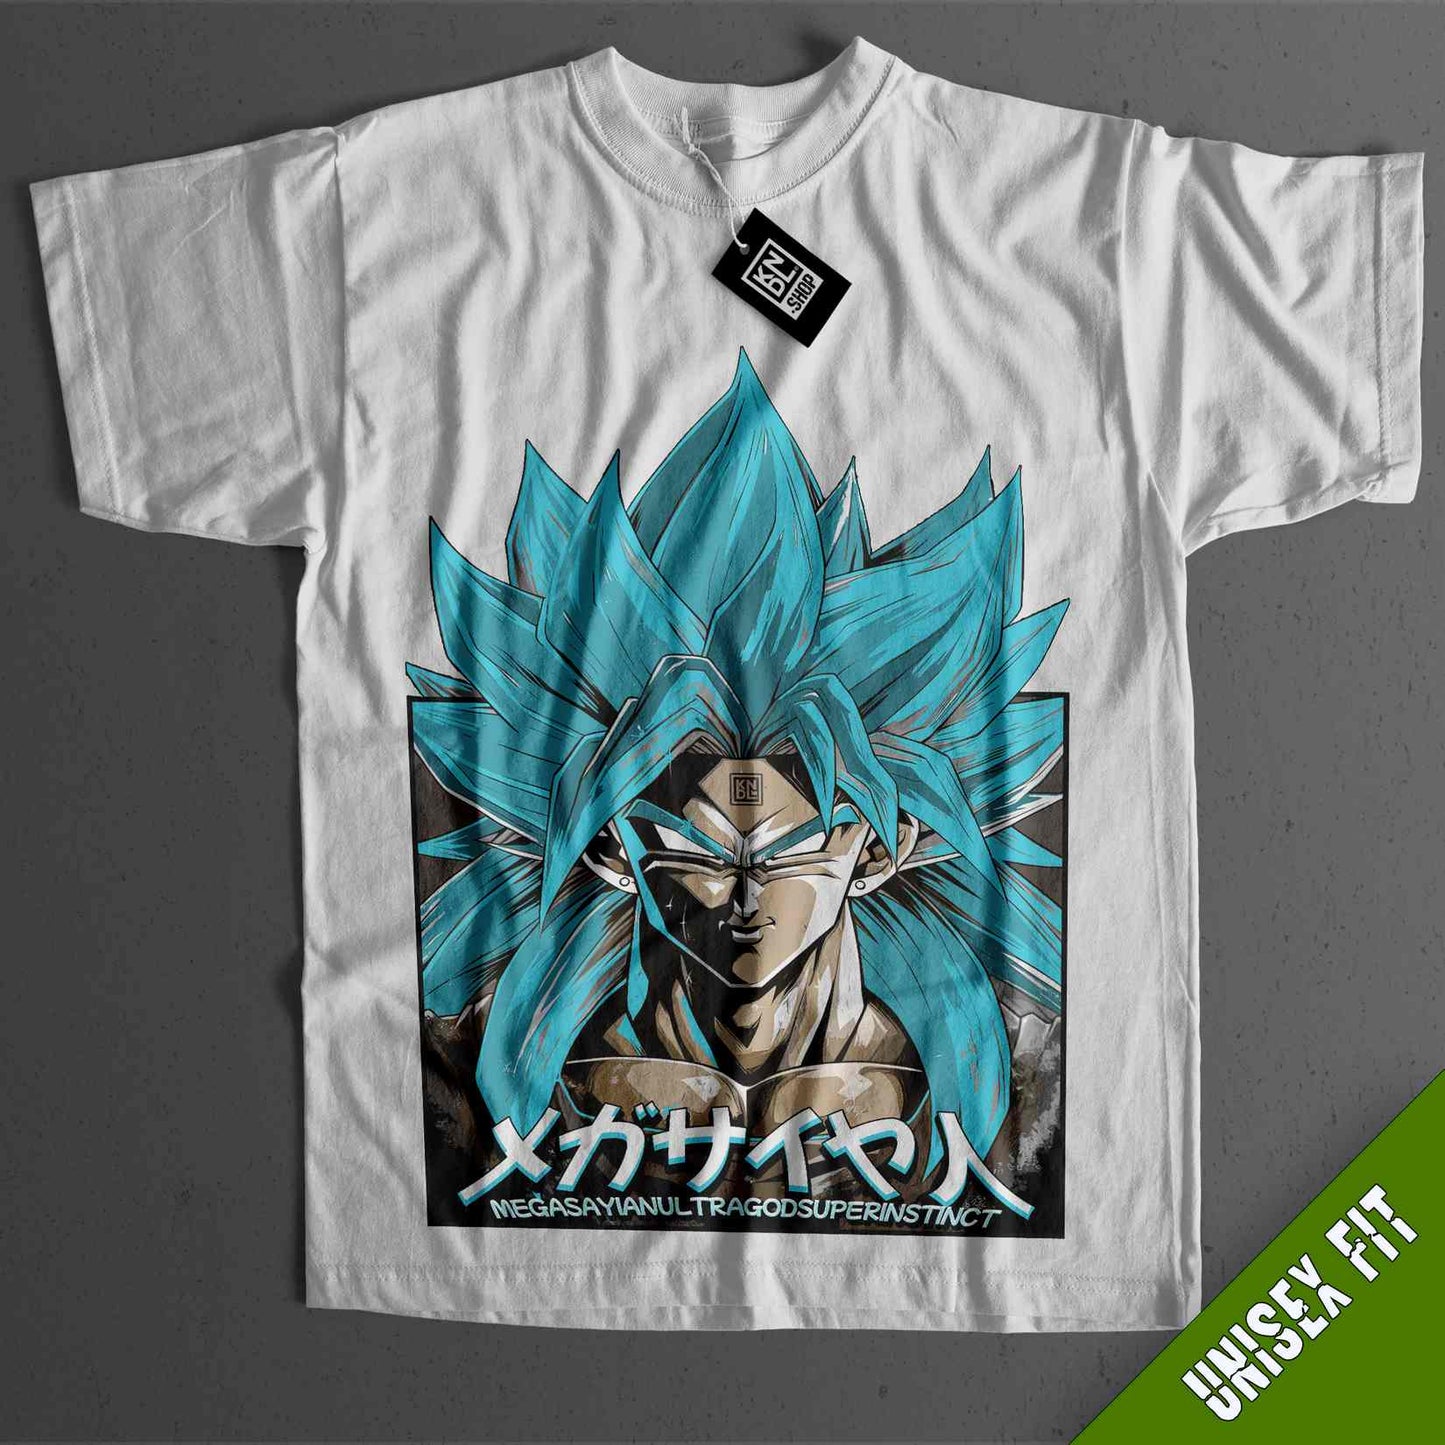 a white t - shirt with a picture of the character gohan